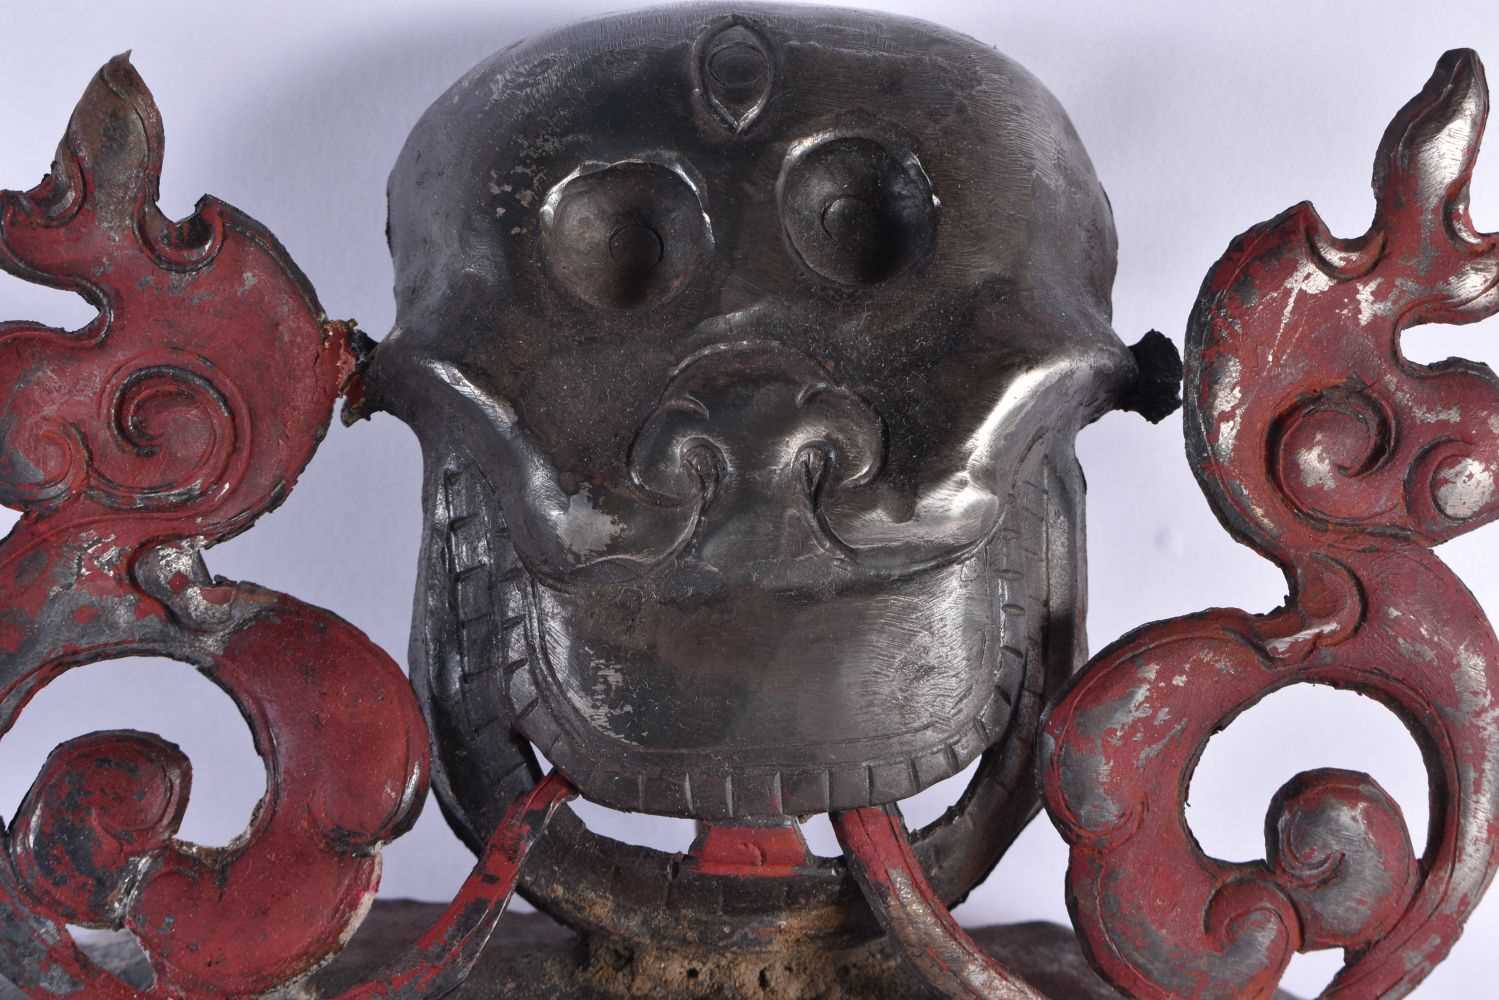 A LARGE 18TH CENTURY CHINESE TIBETAN MIXED METAL POLYCHROMED MASK. 44 cm x 42 cm. - Image 2 of 5